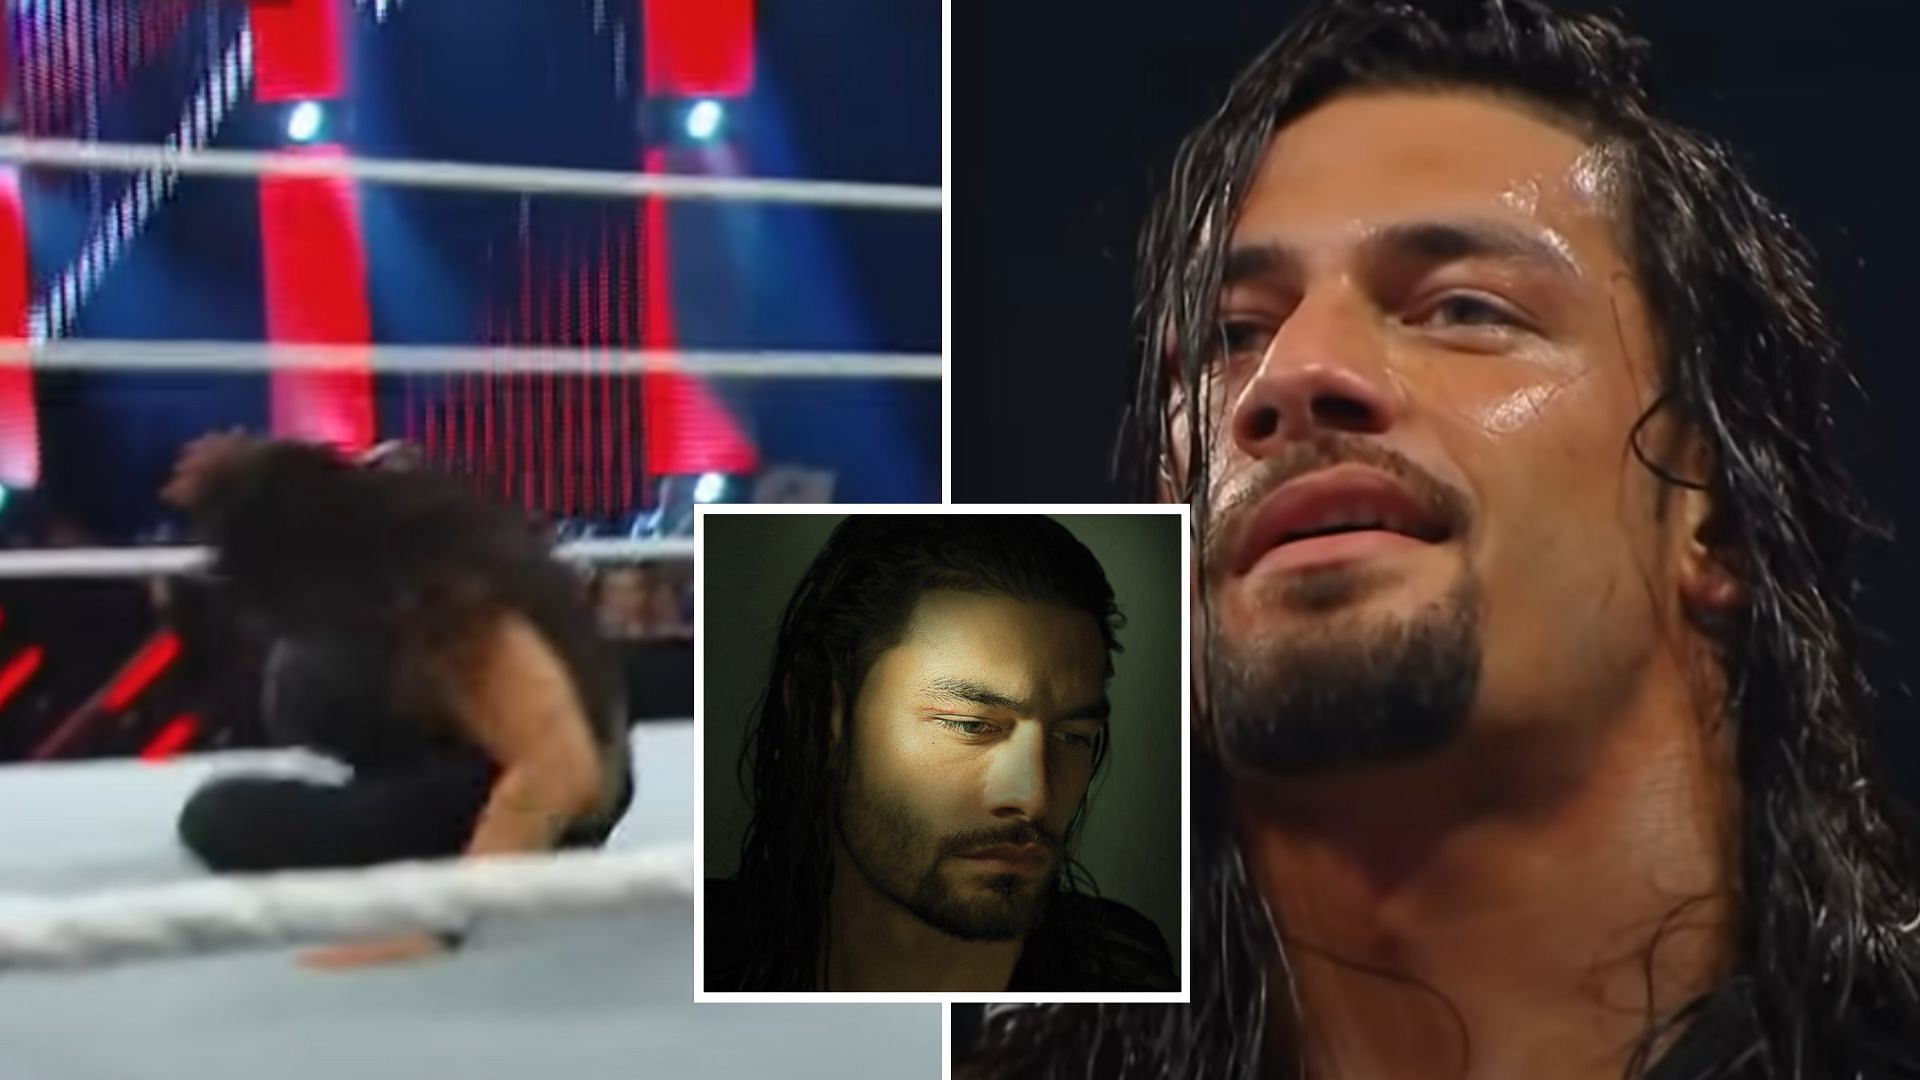 Roman Reigns suffered the injury (center picture) in a freak accident.